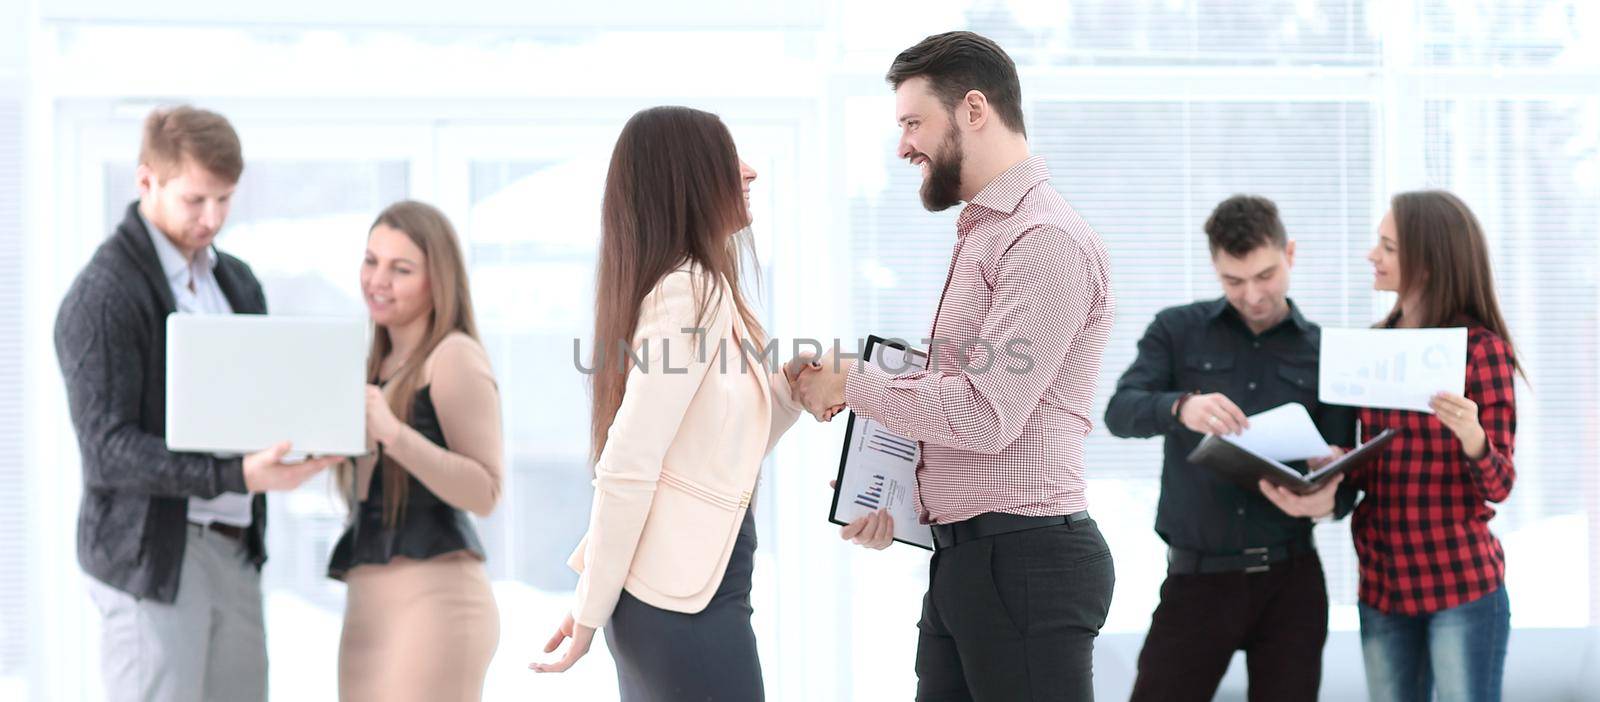 Business partners shaking hands in meeting hall by SmartPhotoLab